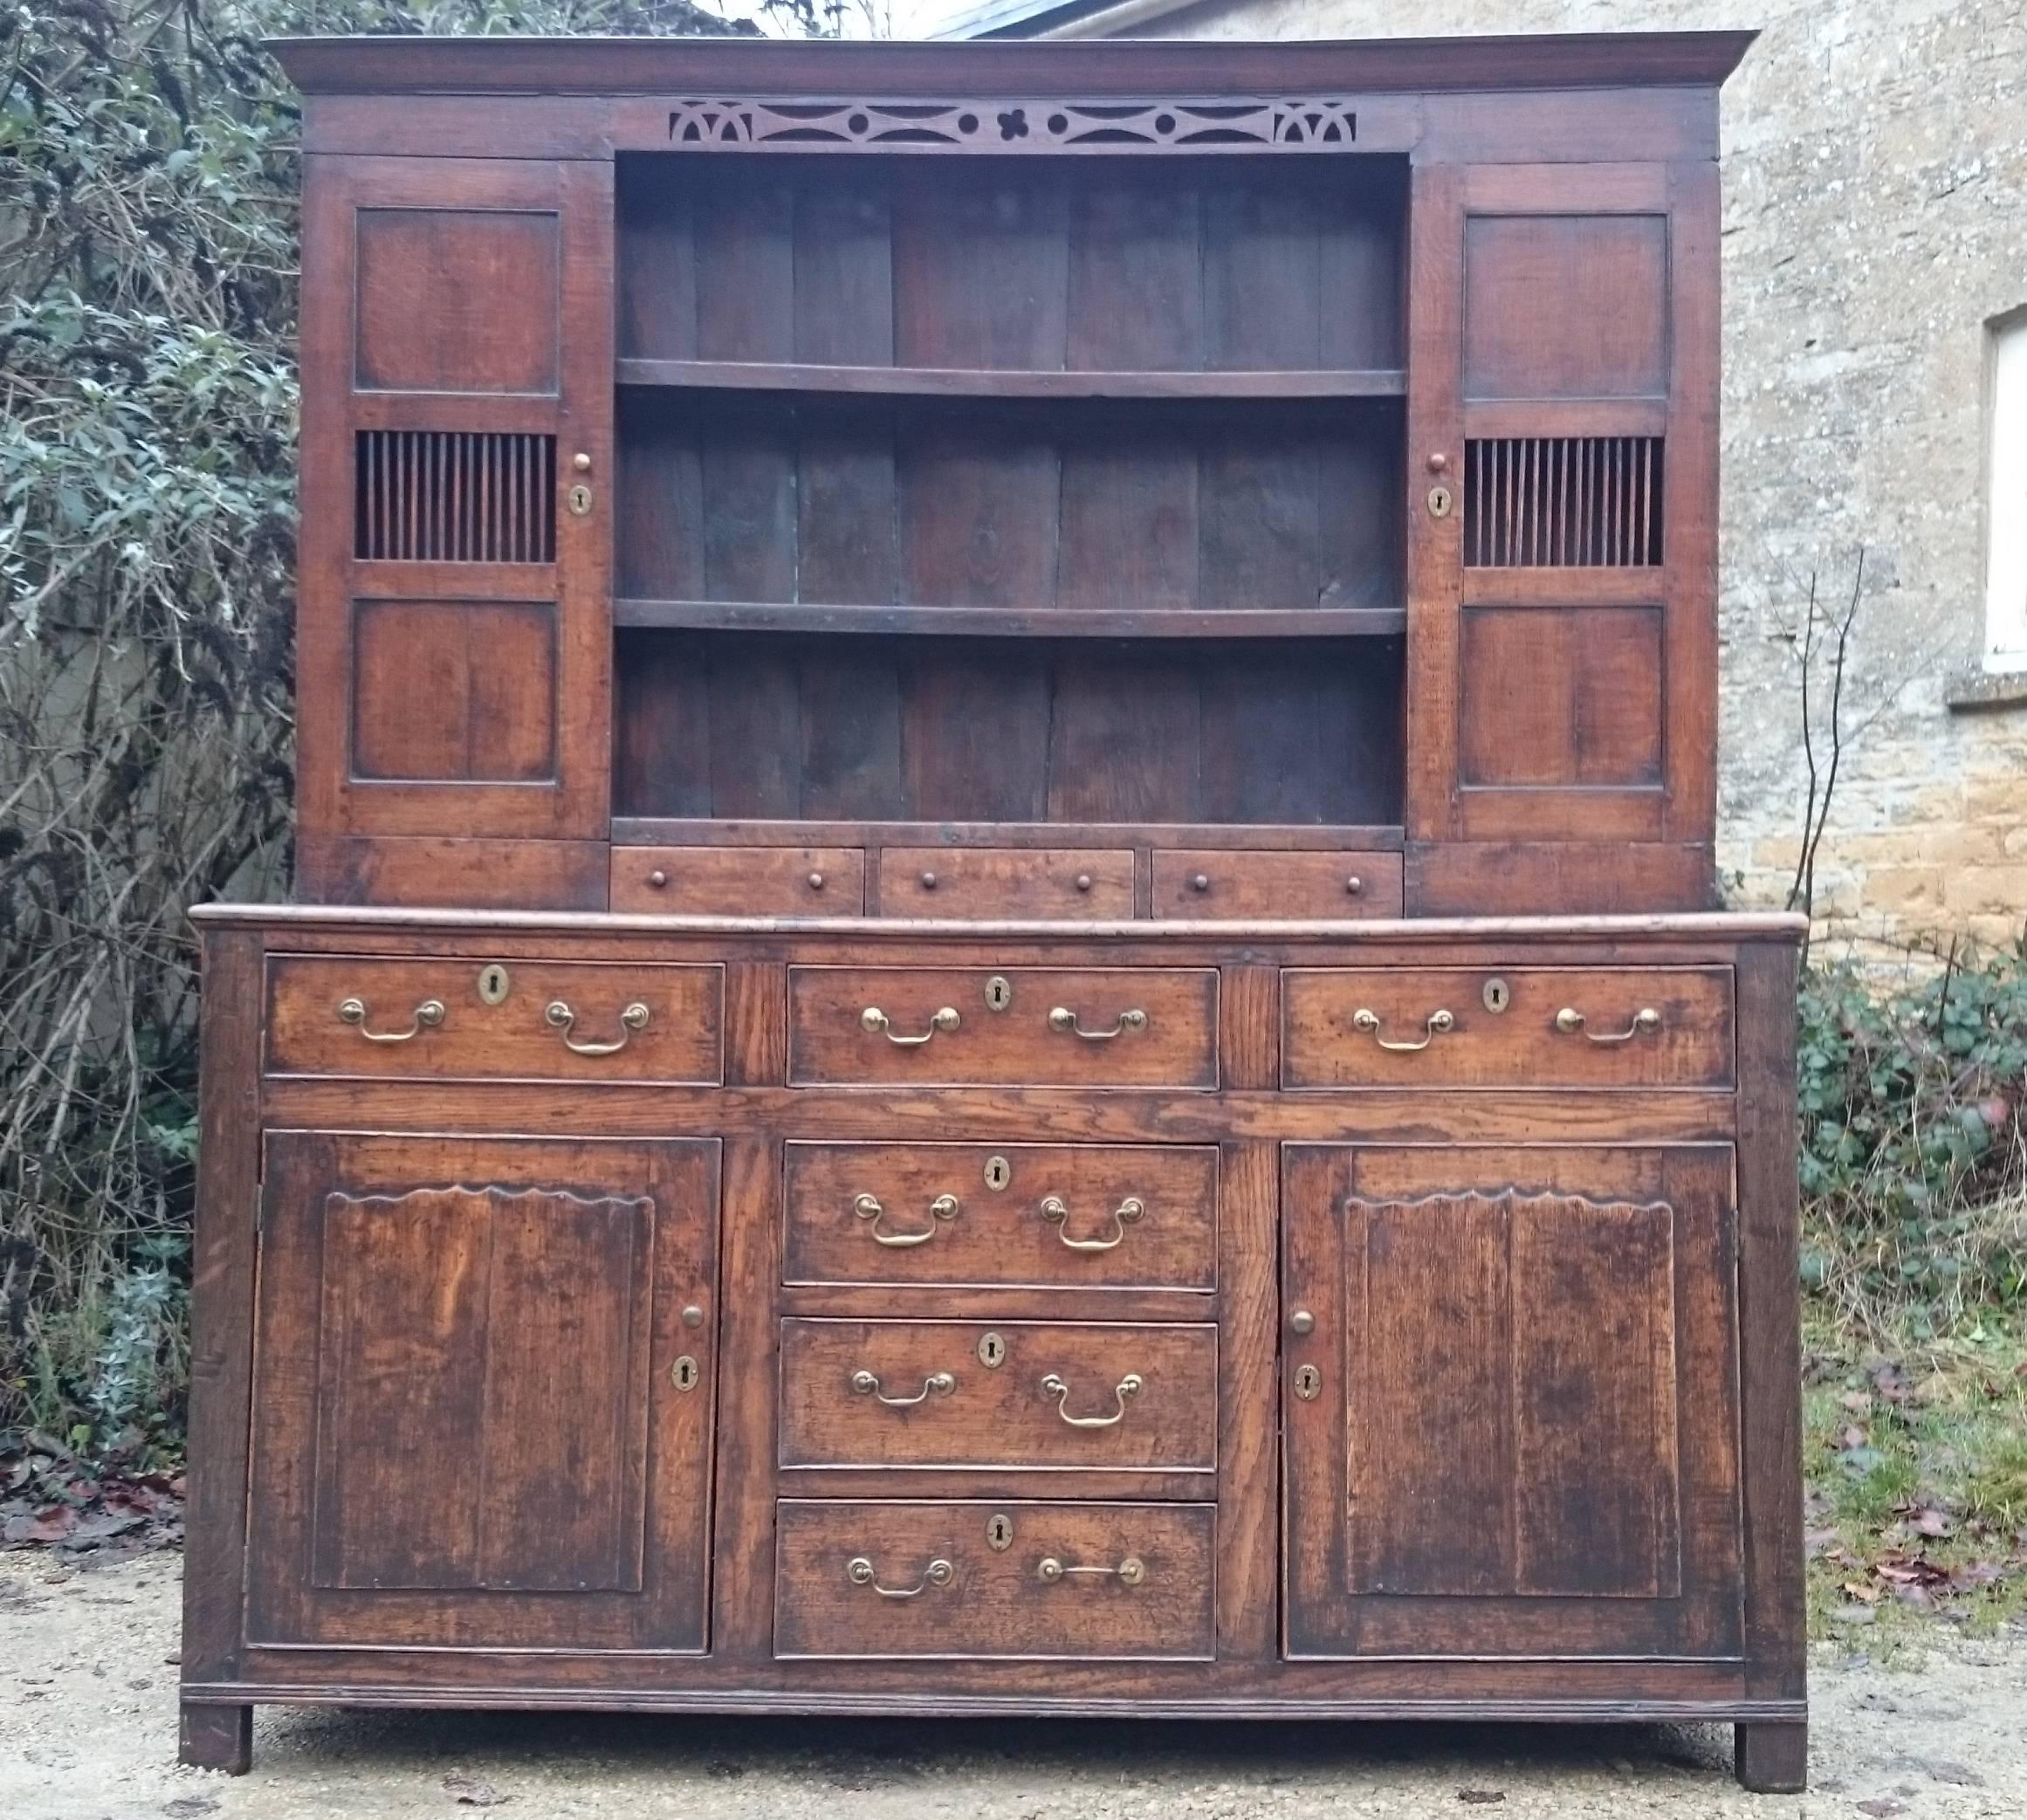 George II period 18th century oak dresser. This dresser provides lots of lovely storage space while not being very deep front to back. The mouse resistant upper cupboards with bars on the doors are interesting. There are six large drawers and three